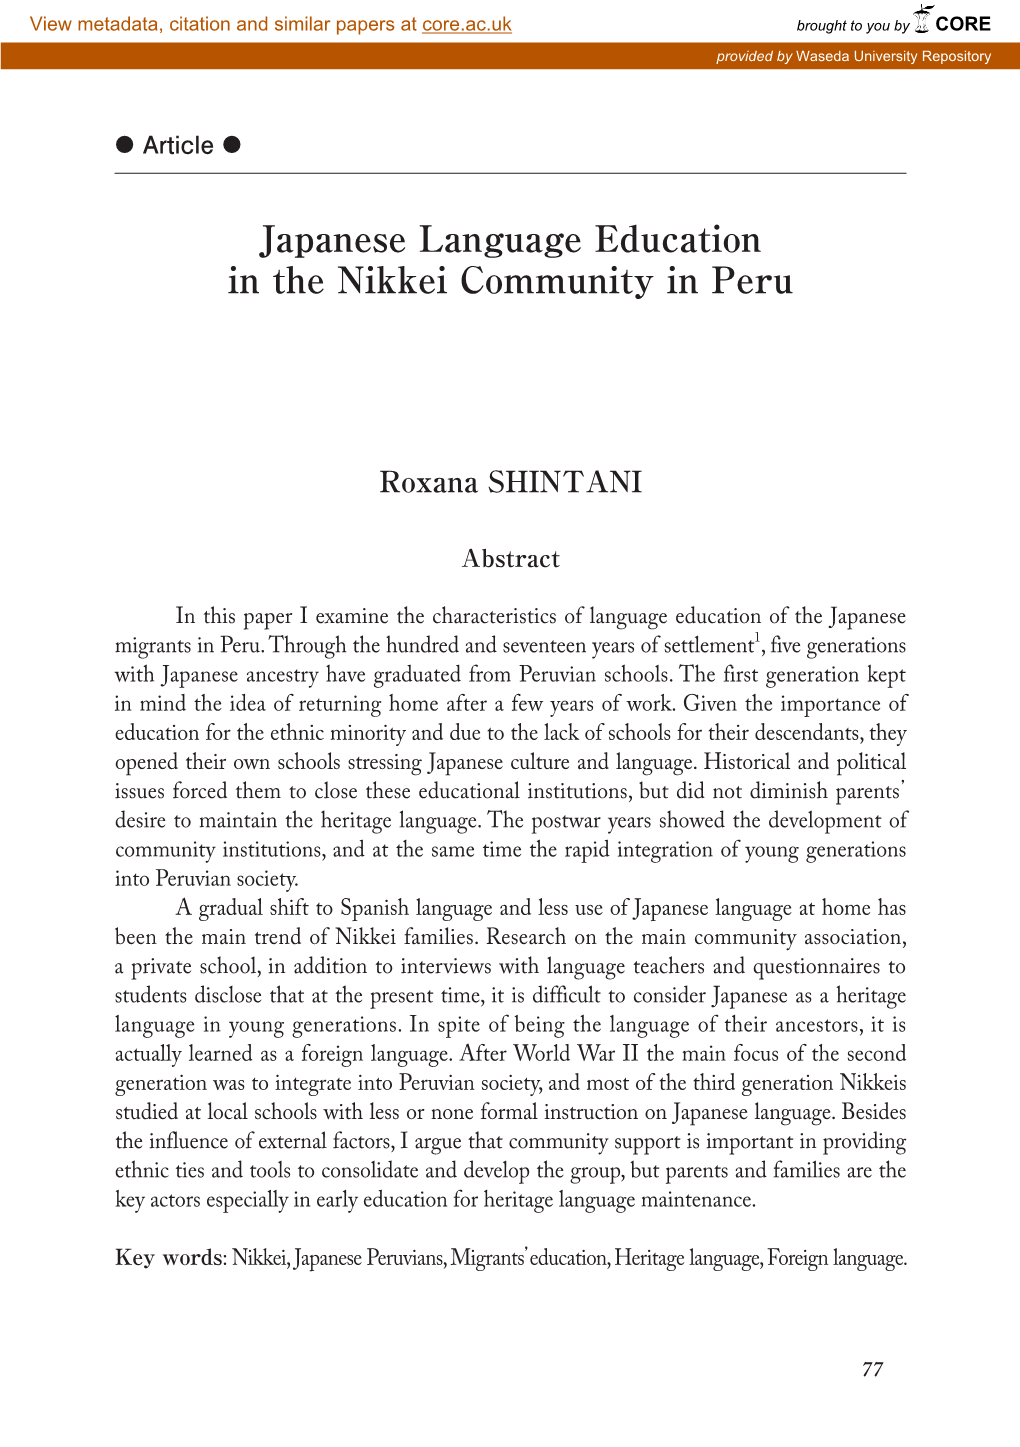 Japanese Language Education in the Nikkei Community in Peru